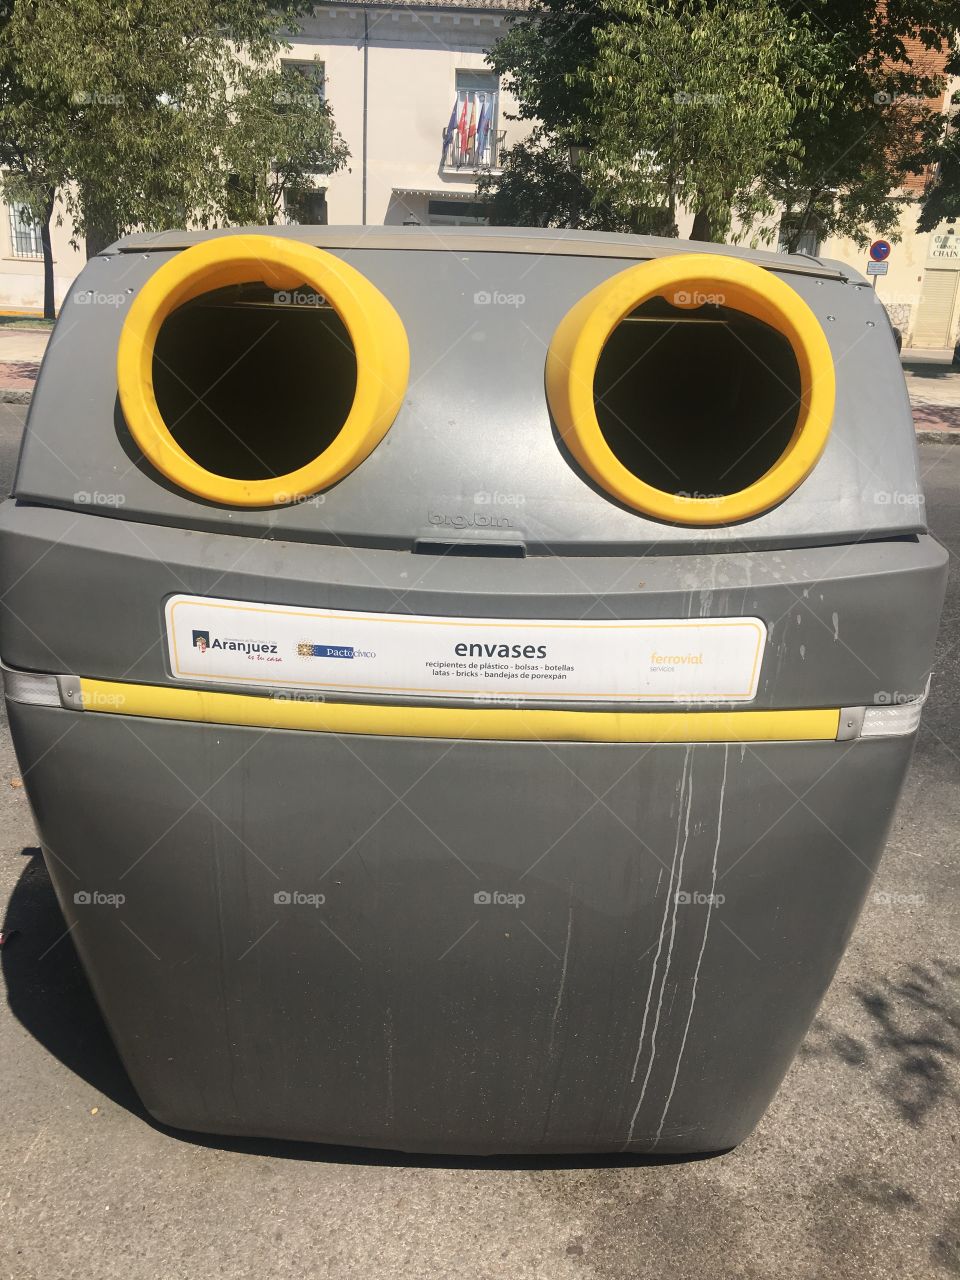 Recycling bin looks as if it just swallowed something yummy with to circles for eyes and a long yellow strip for a mouth as white liquid dribble down the side.